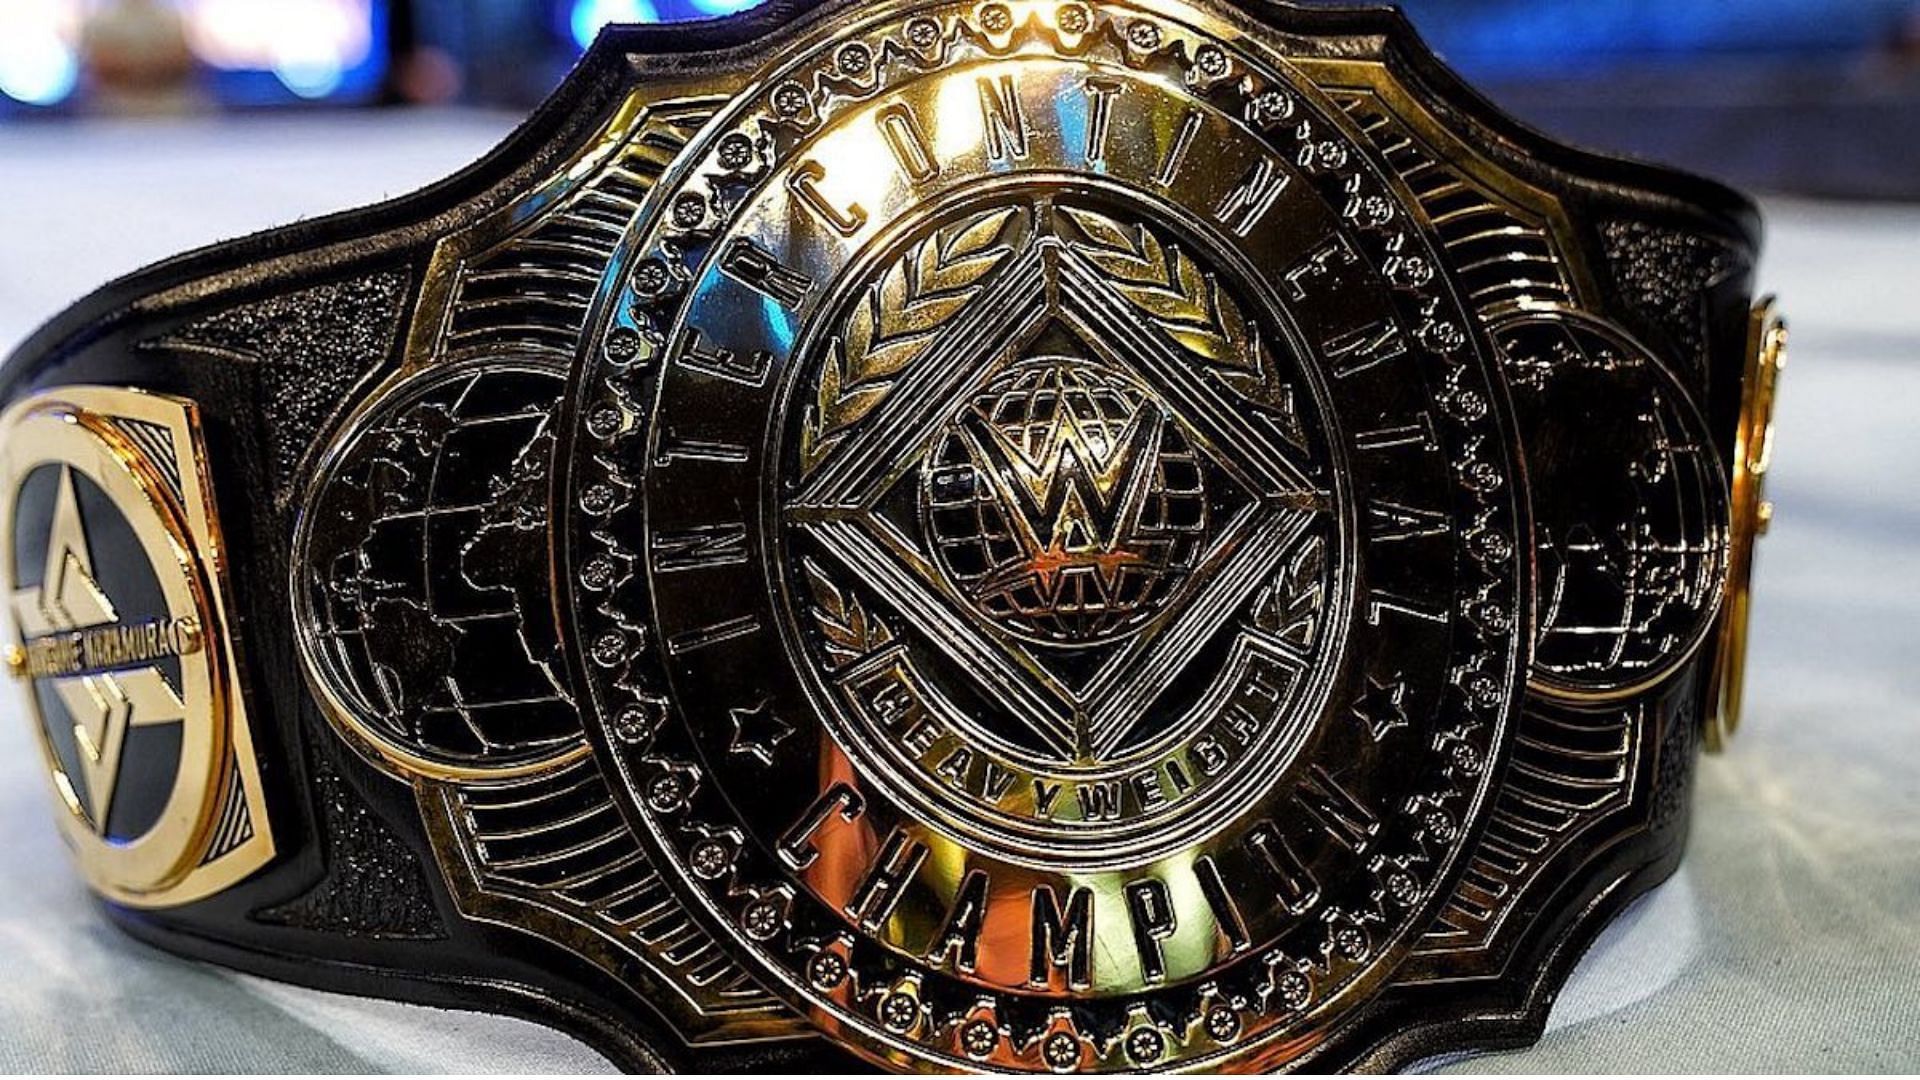 Will a former WWE Intercontinental Champion join AEW in the future?